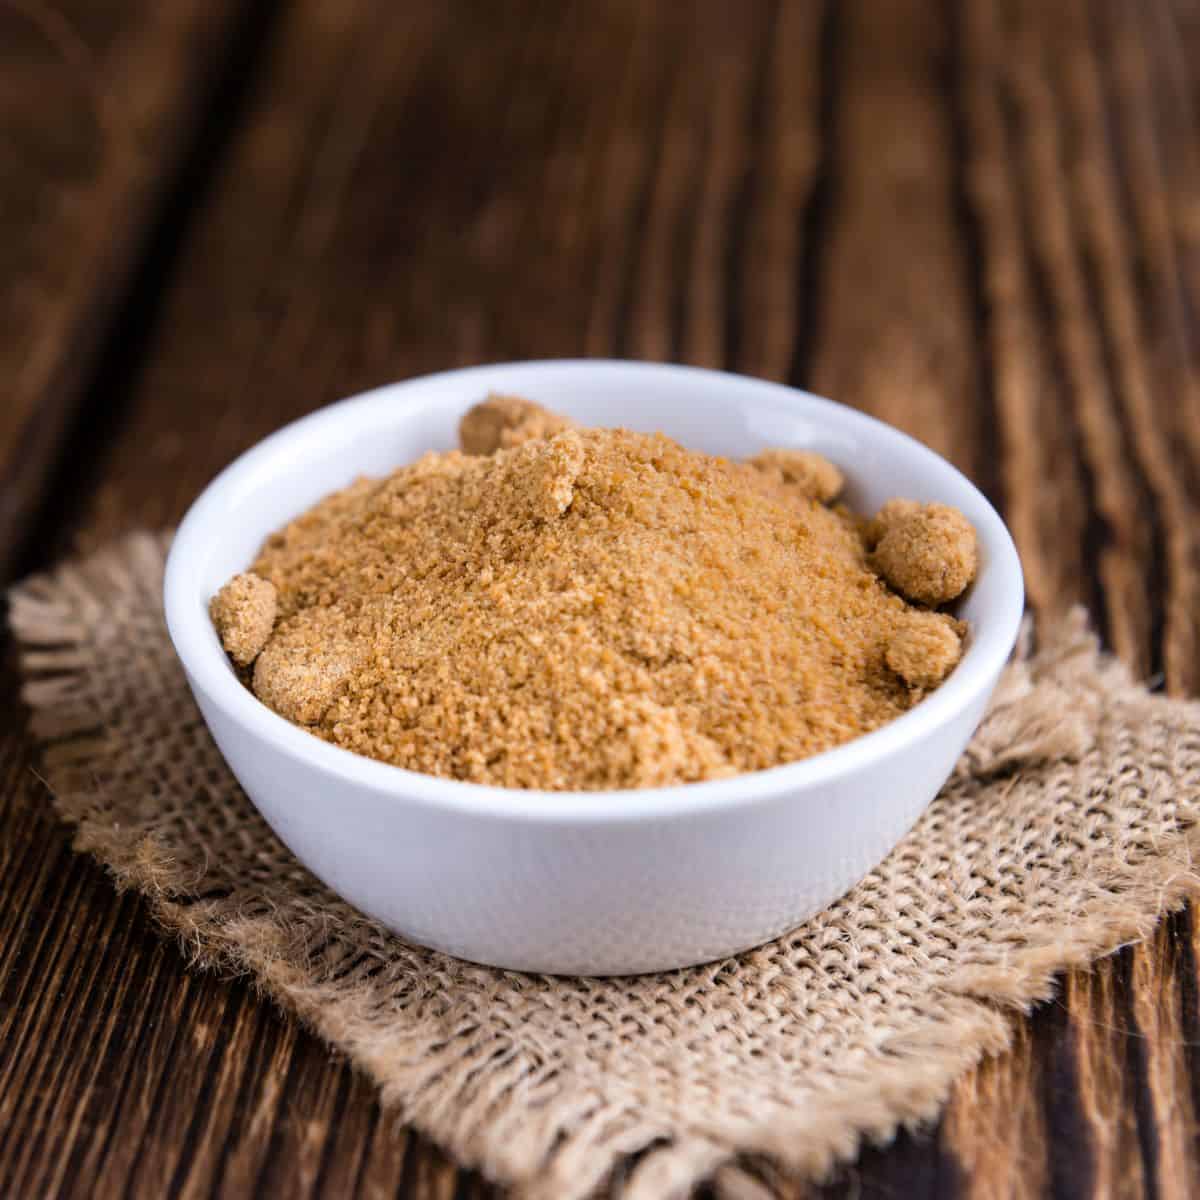 coconut sugar substitutes featured image, bowl of brown coloured sugar.